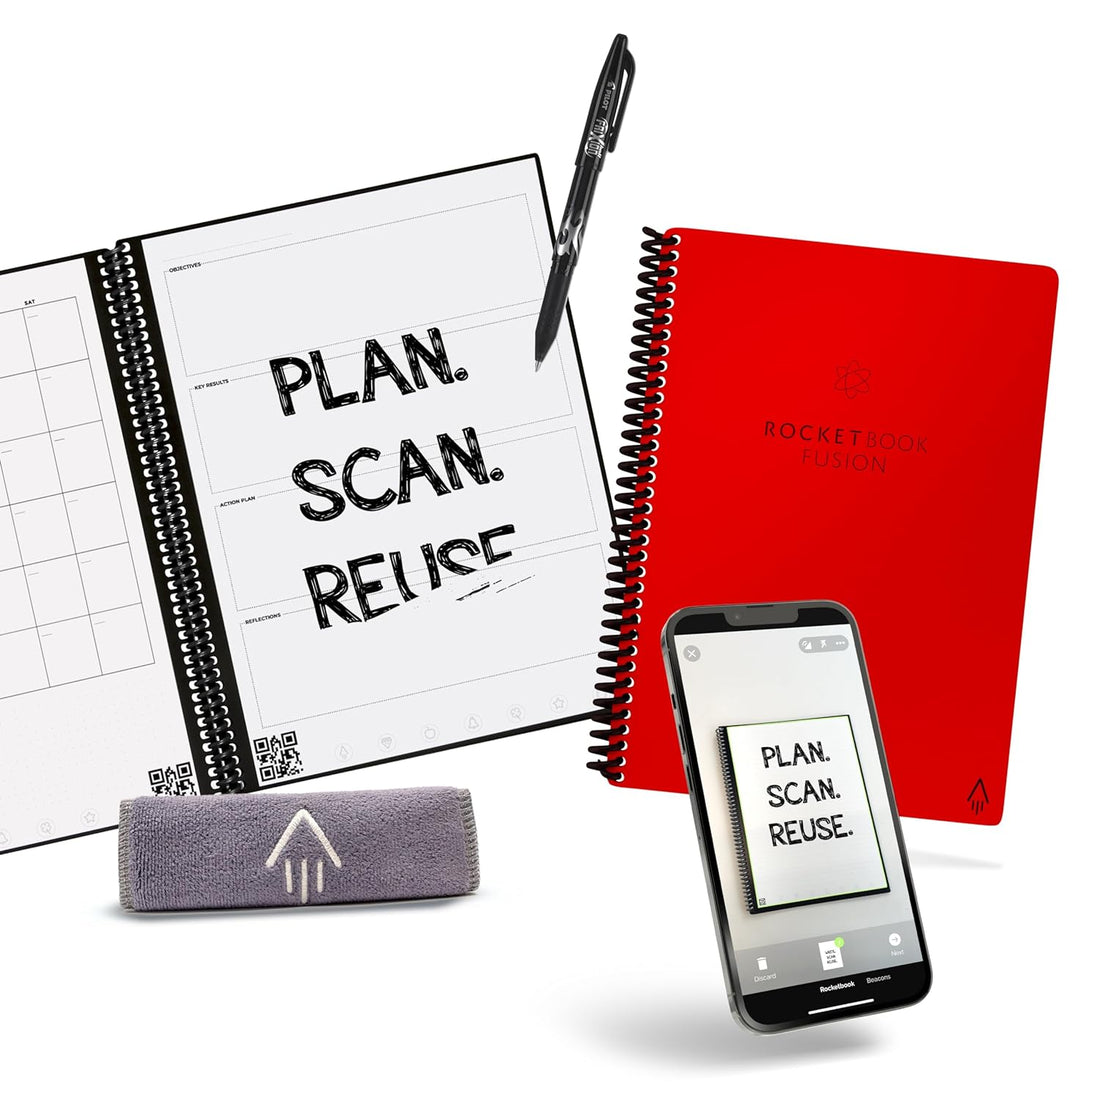 Rocketbook Fusion Smart Reusable Notebook - Calendar, To-Do Lists, and Note Template Pages with 1 Pilot Frixion Pen & 1 Microfiber Cloth Included - Atomic Red Cover, Executive Size (6" x 8.8")